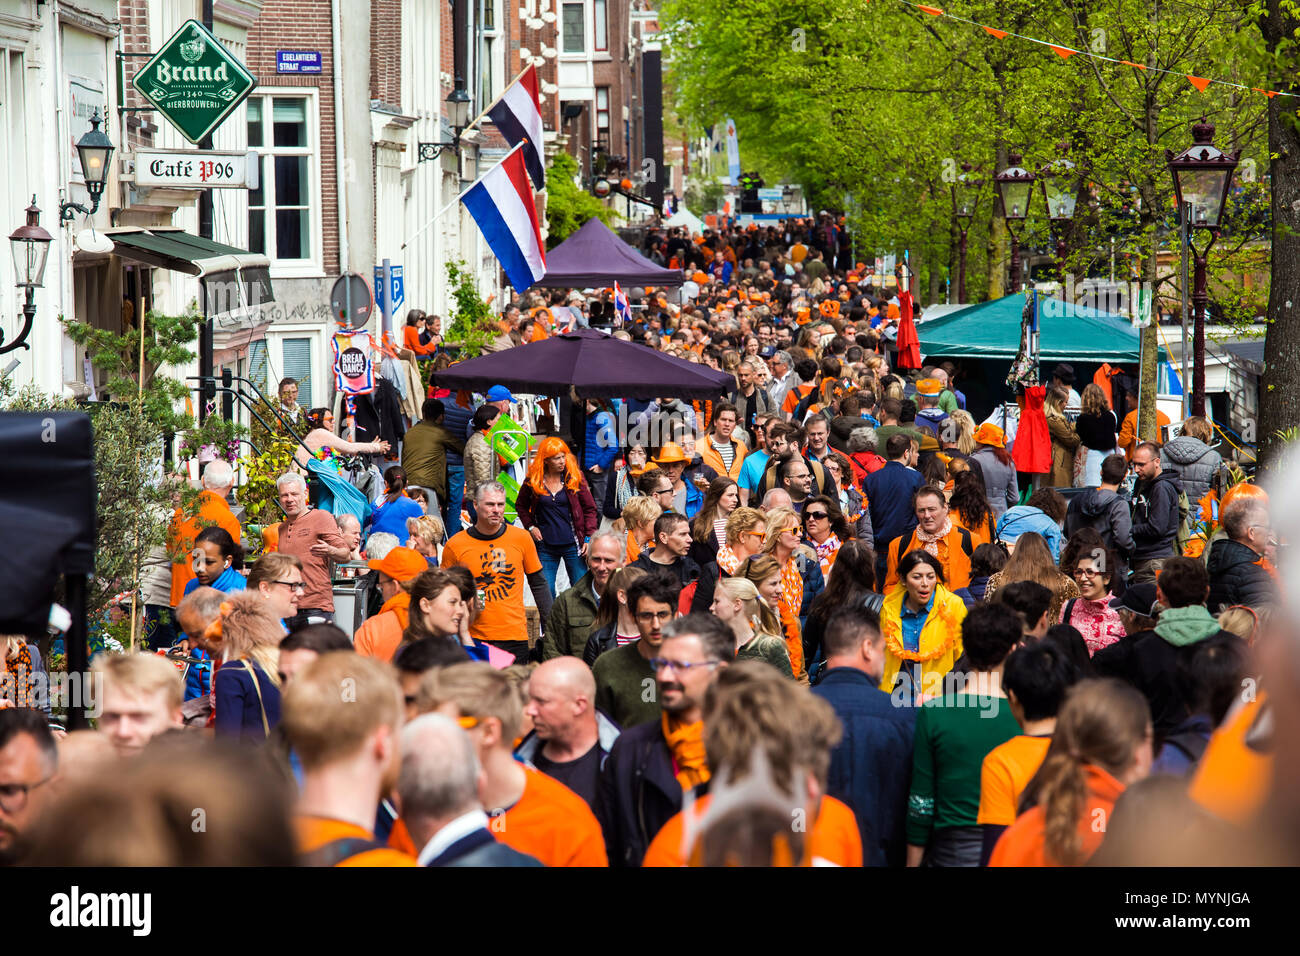 Dutch cities kick off King's Day with crowded King's Night parties